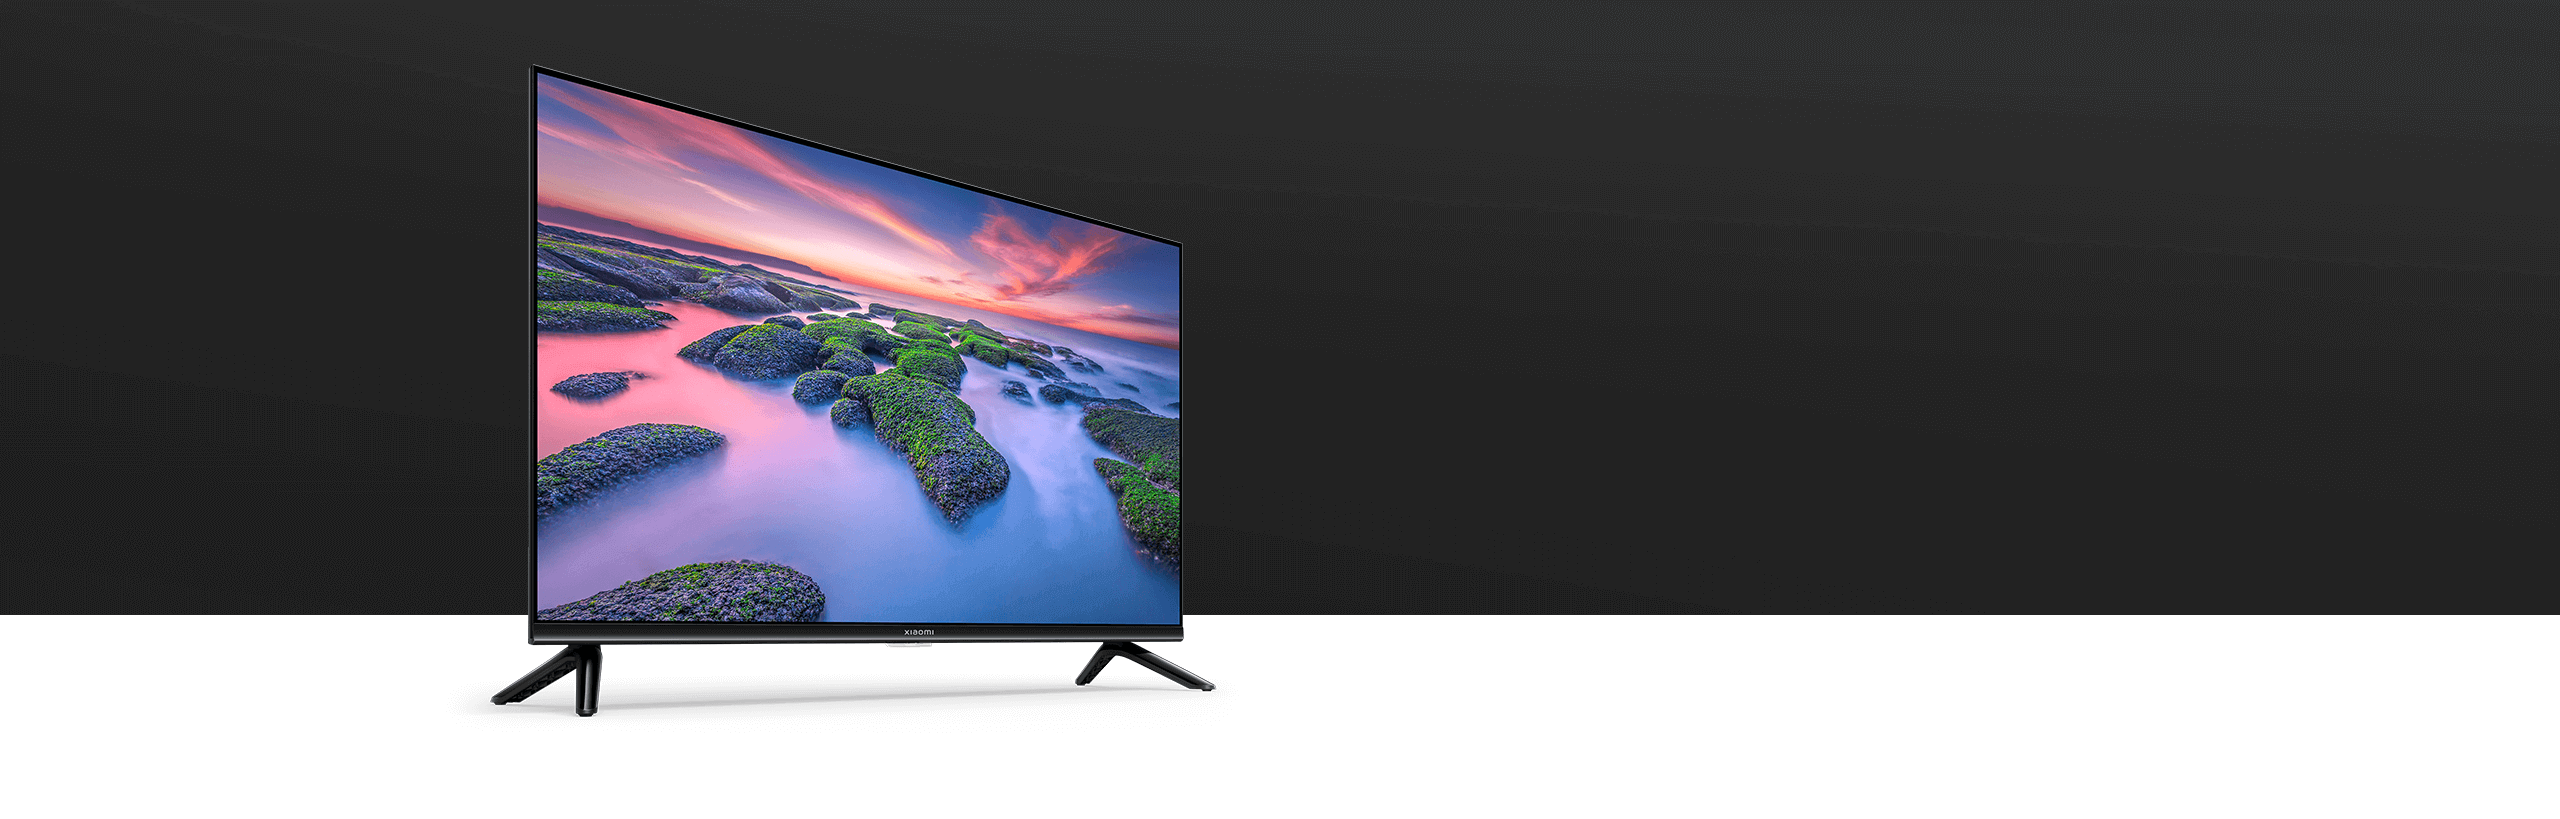 Xiaomi Mi A2 32-Inch Smart Android HD LED TV